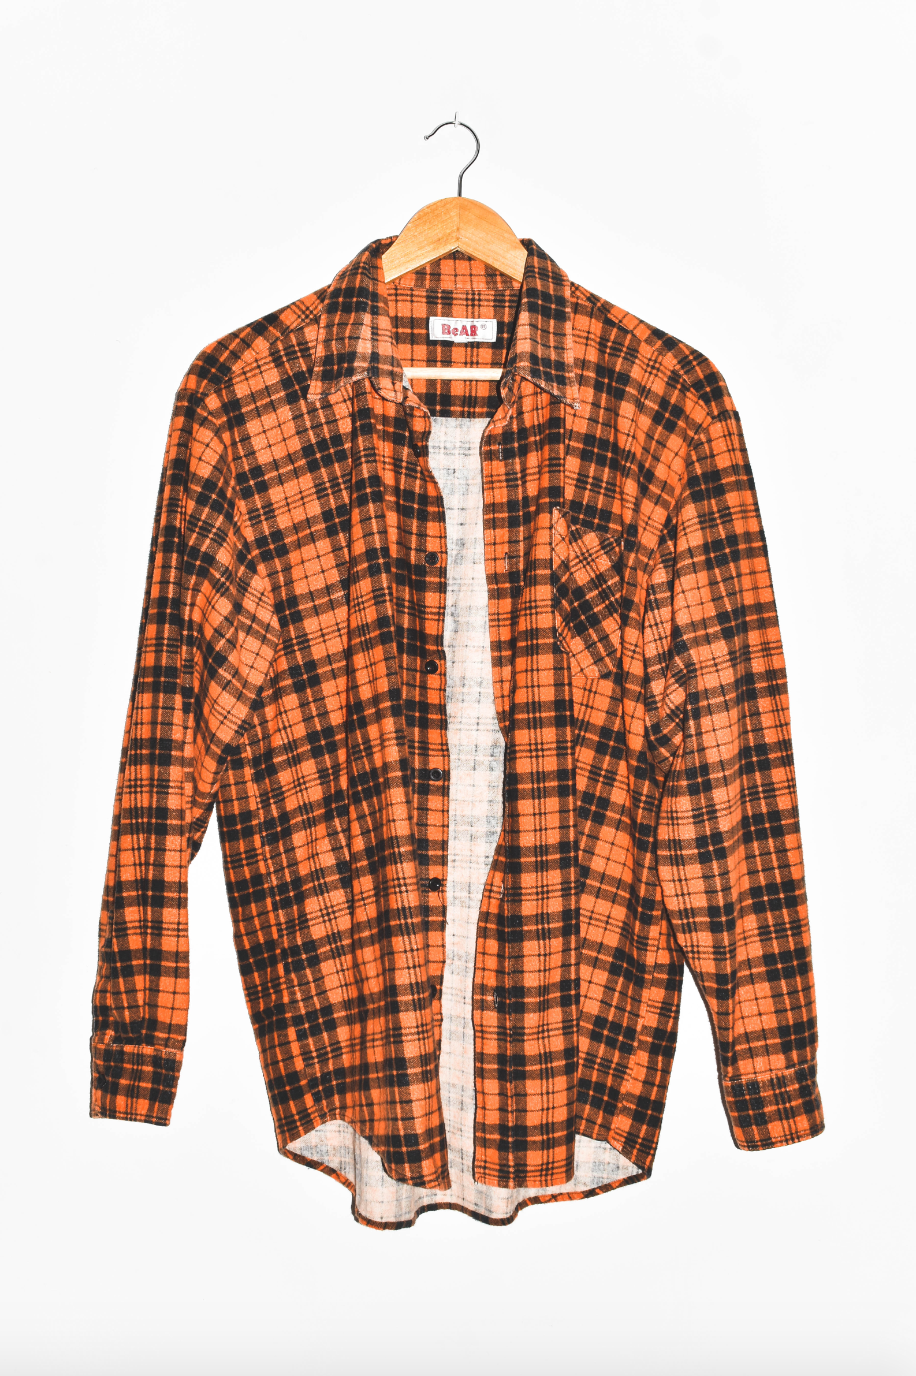 NEW IN! Flannel